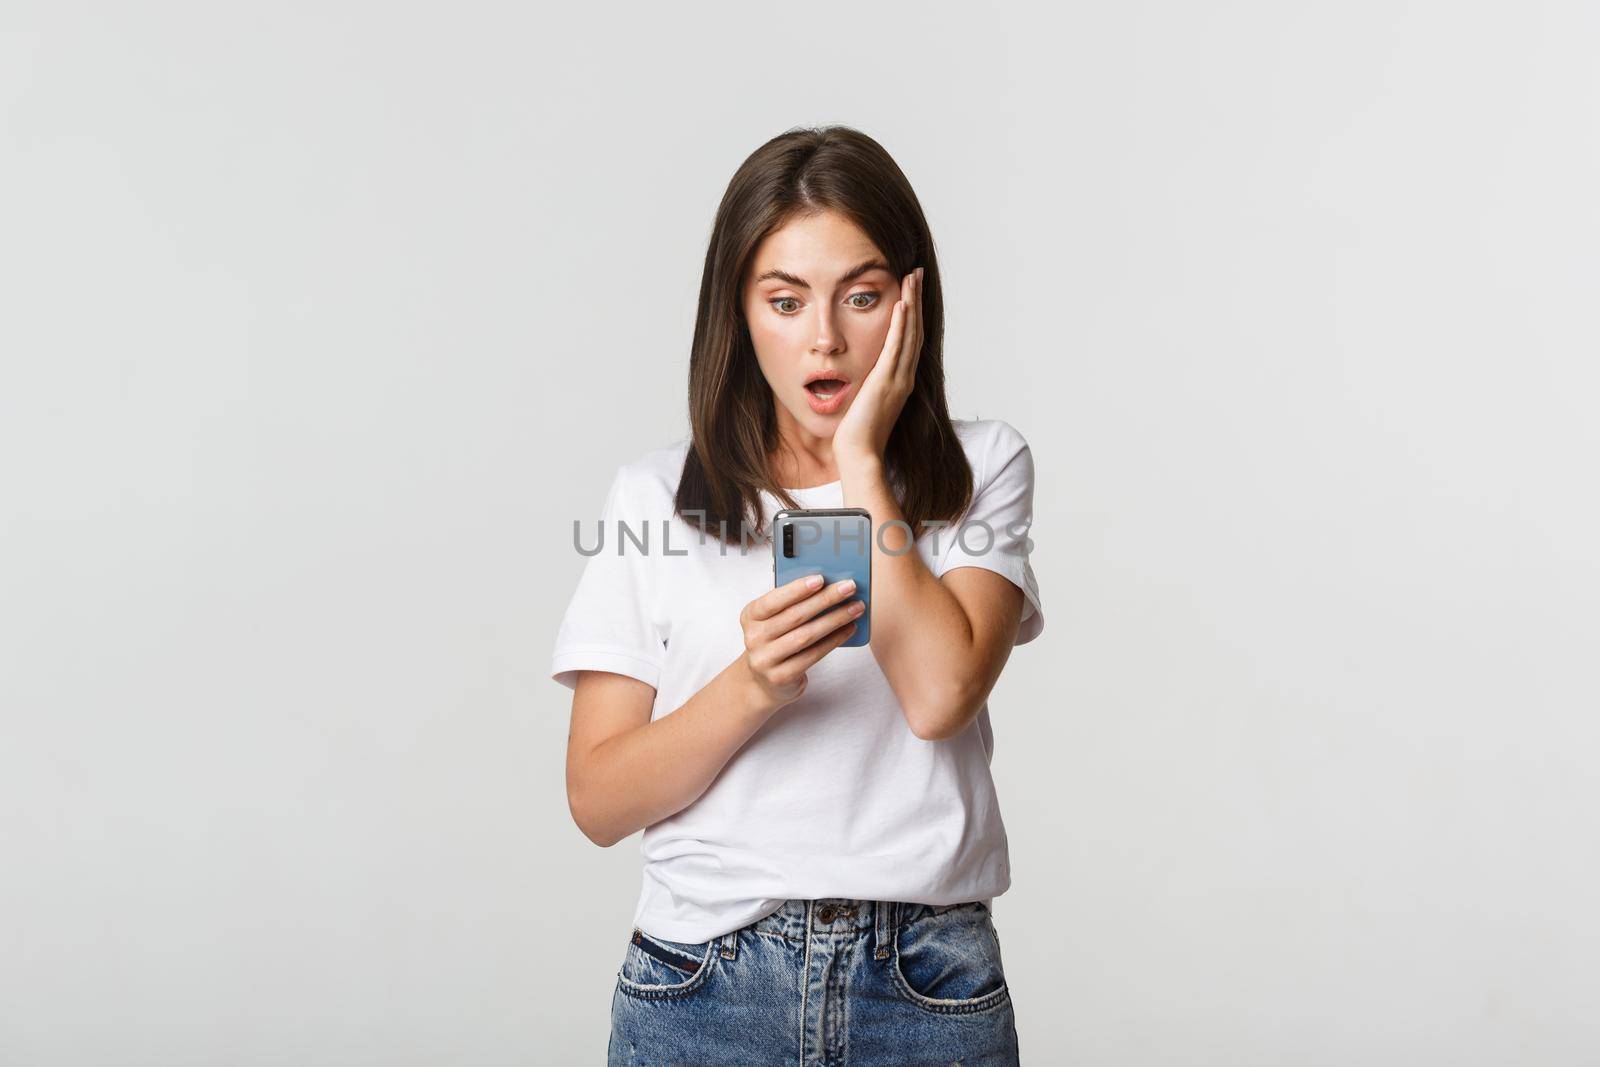 Shocked and impressed brunette girl looking amazed at smartphone screen.